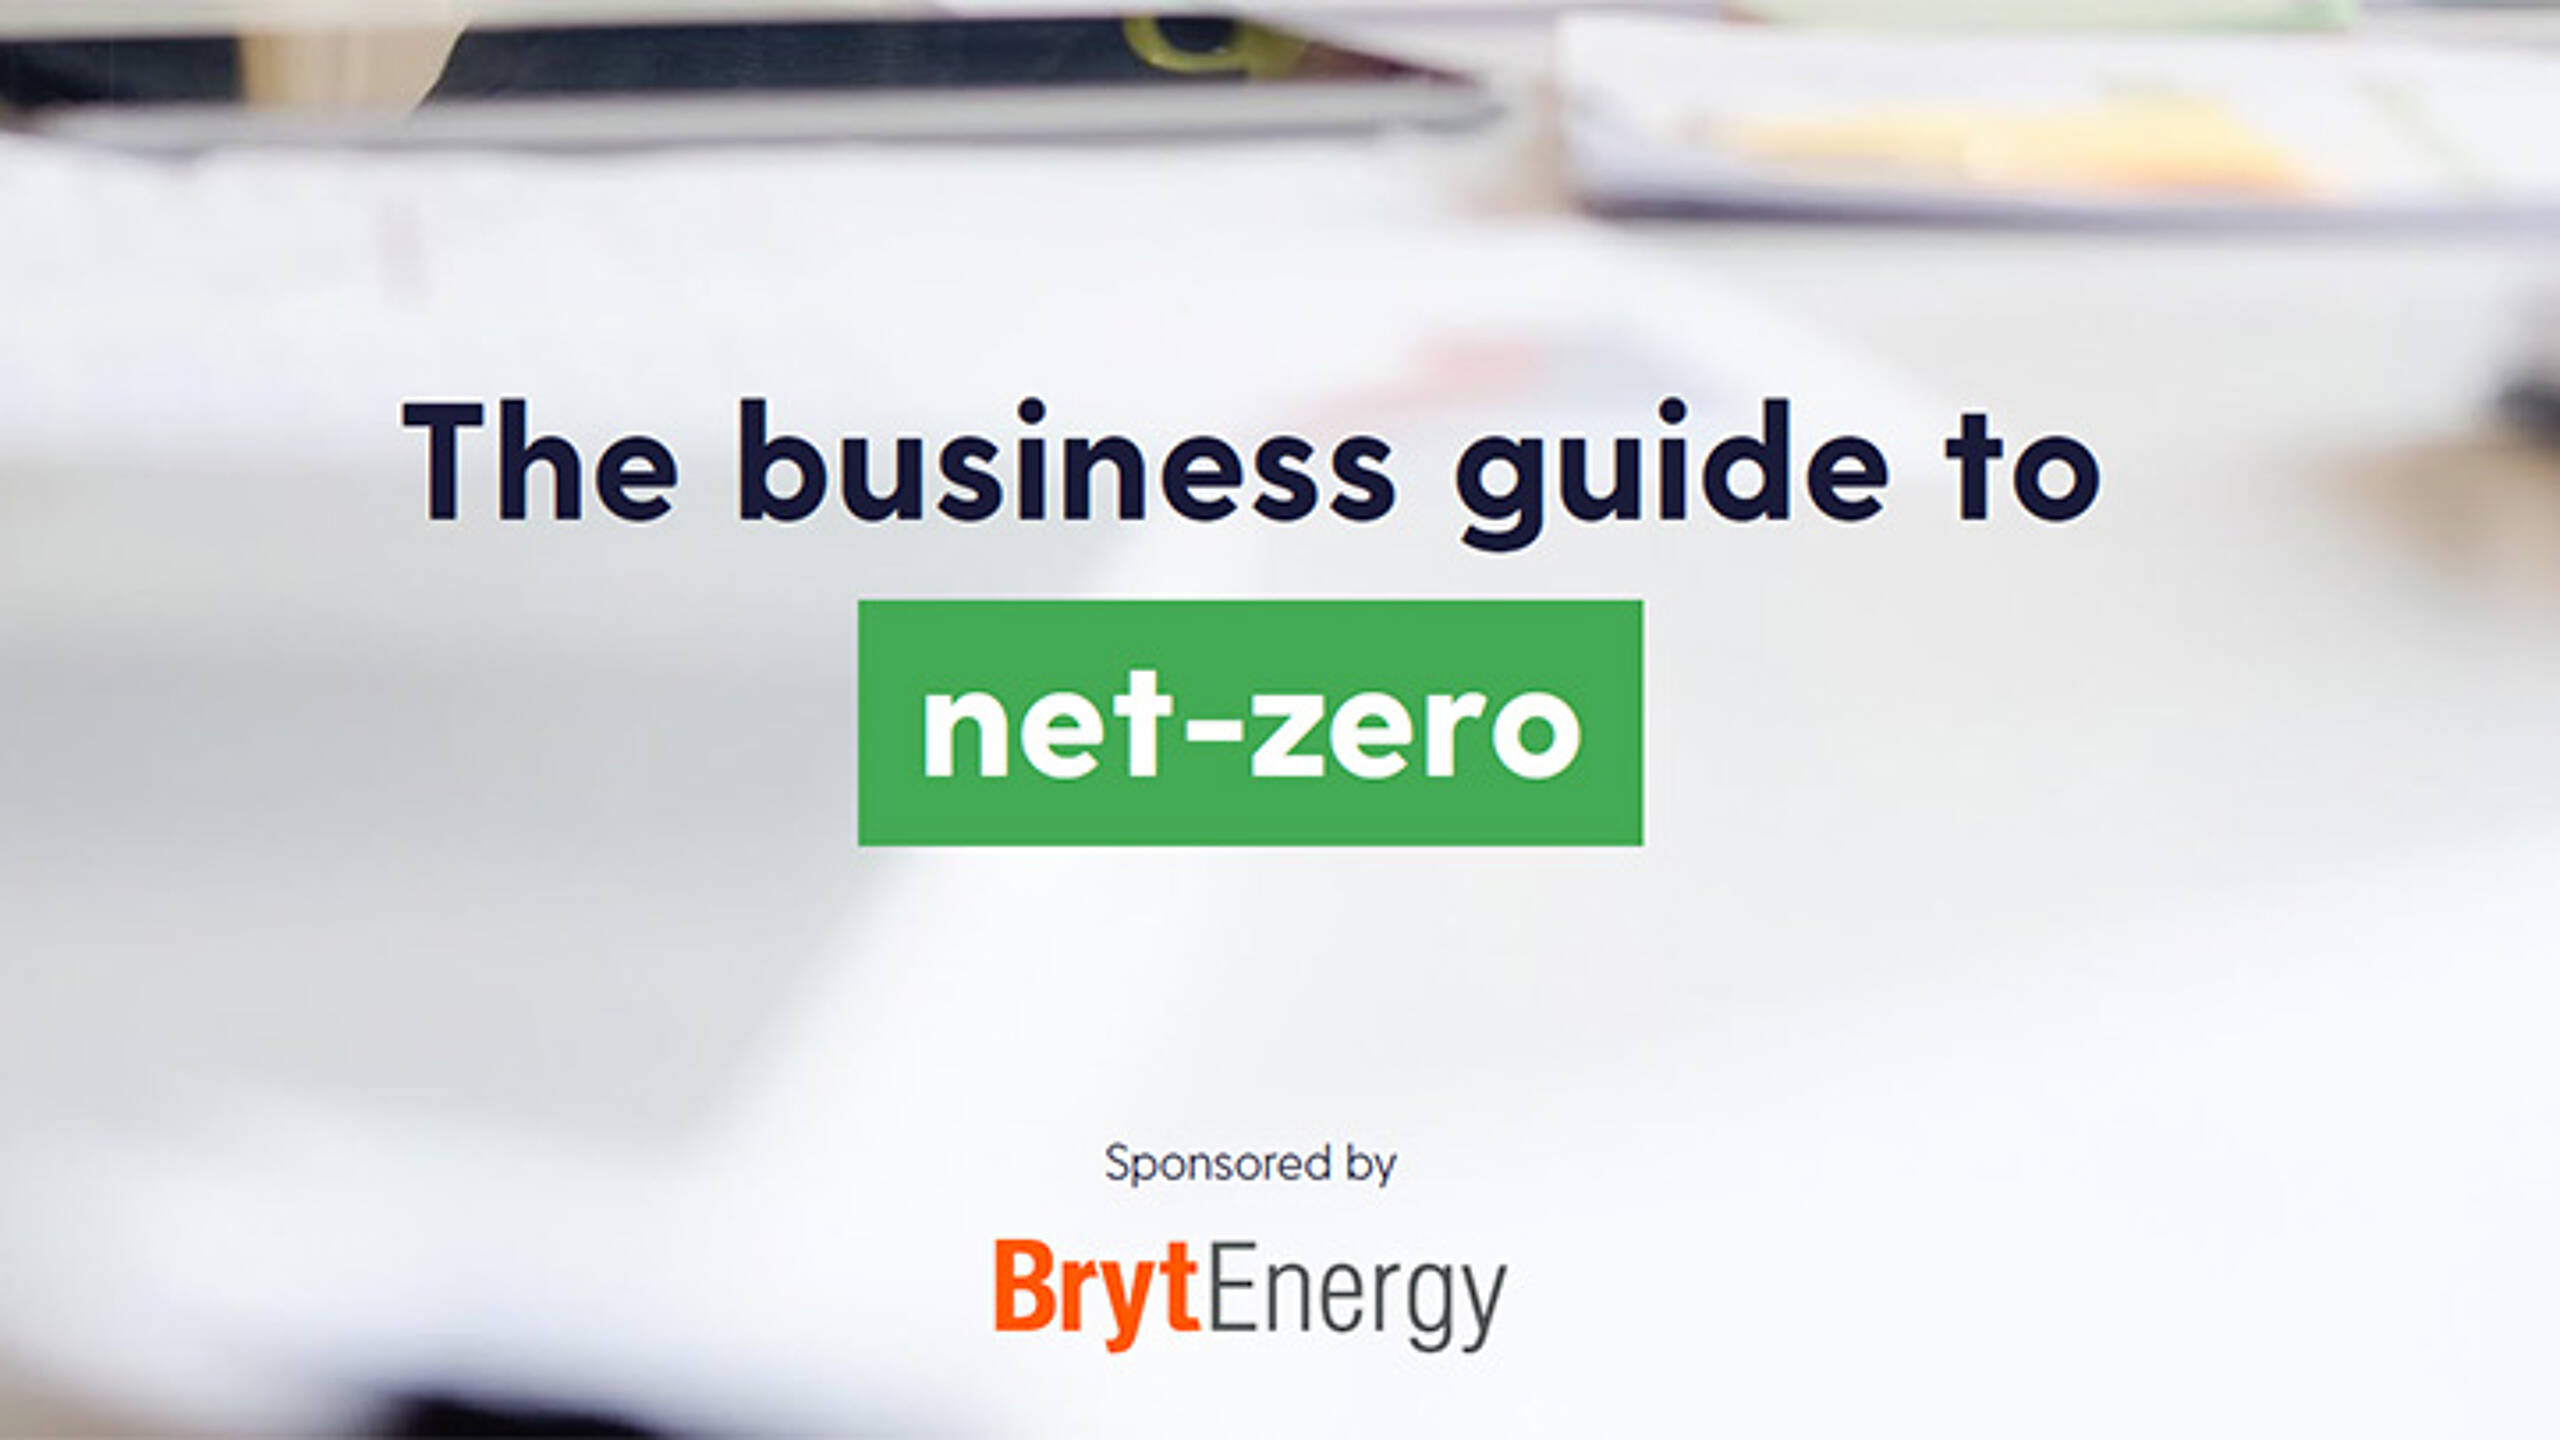 edie publishes new report on how to become a net-zero business